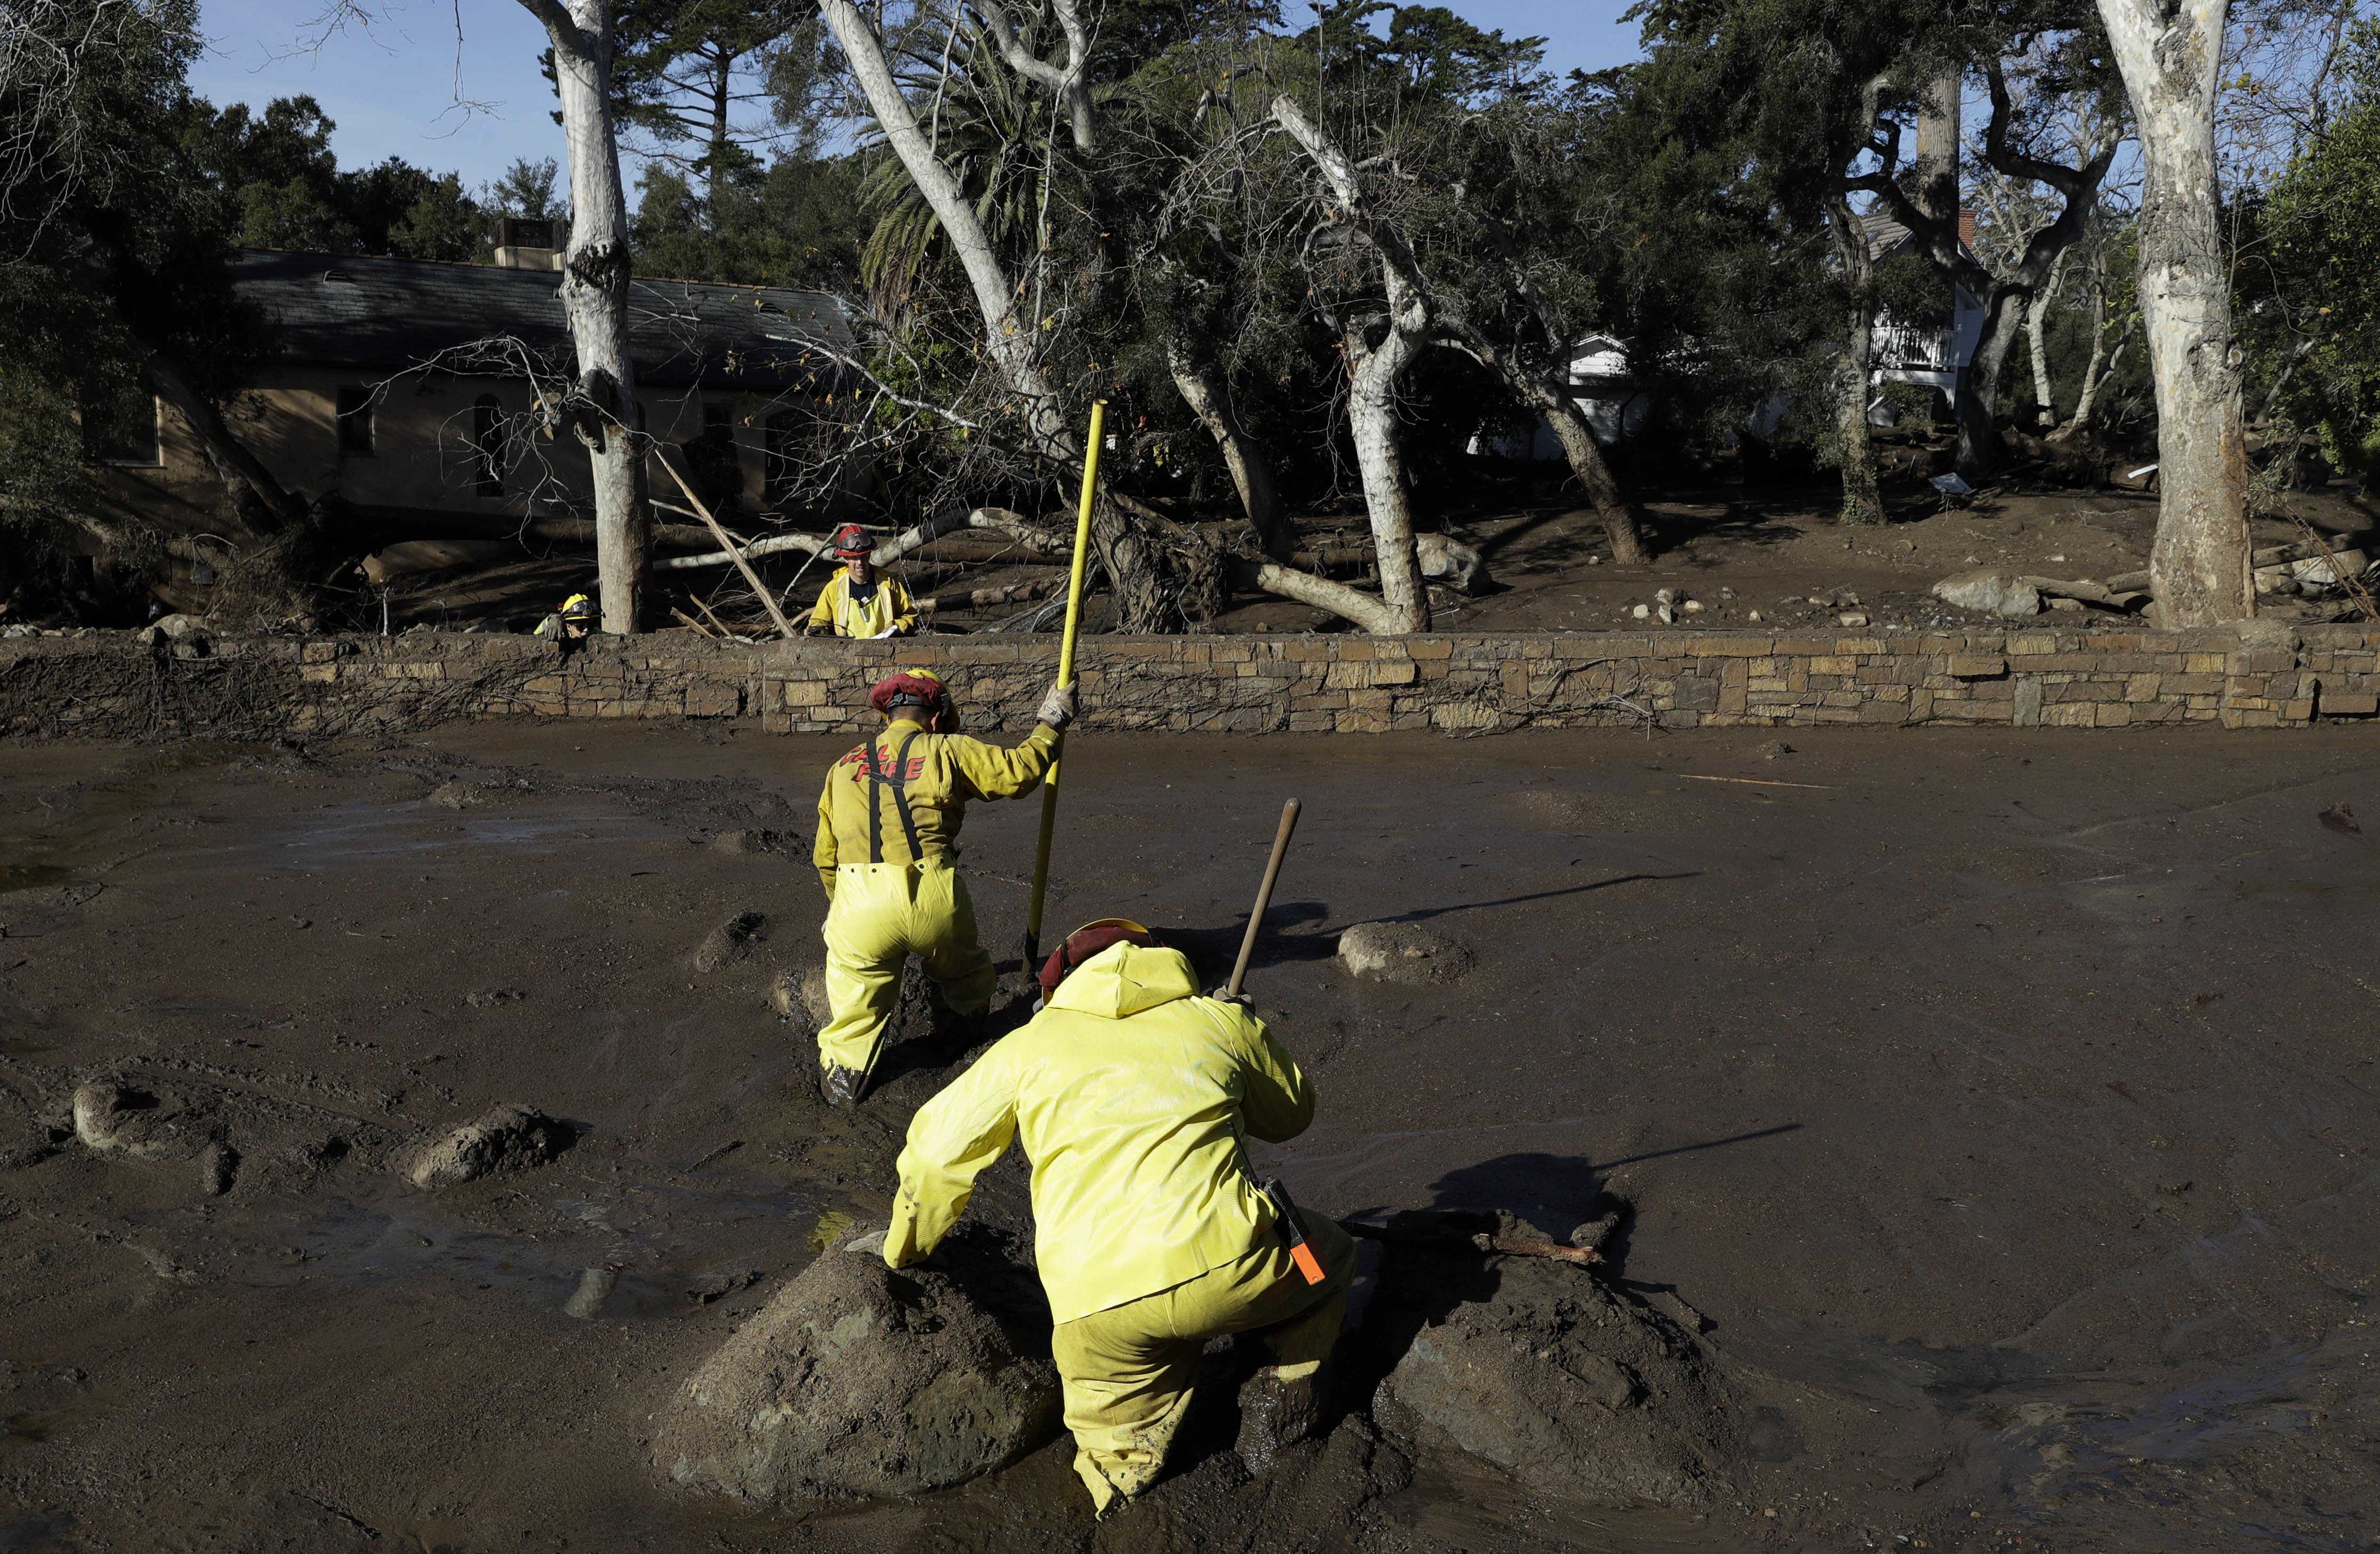 Body of Montecito woman found, brings mudslide death toll to 21